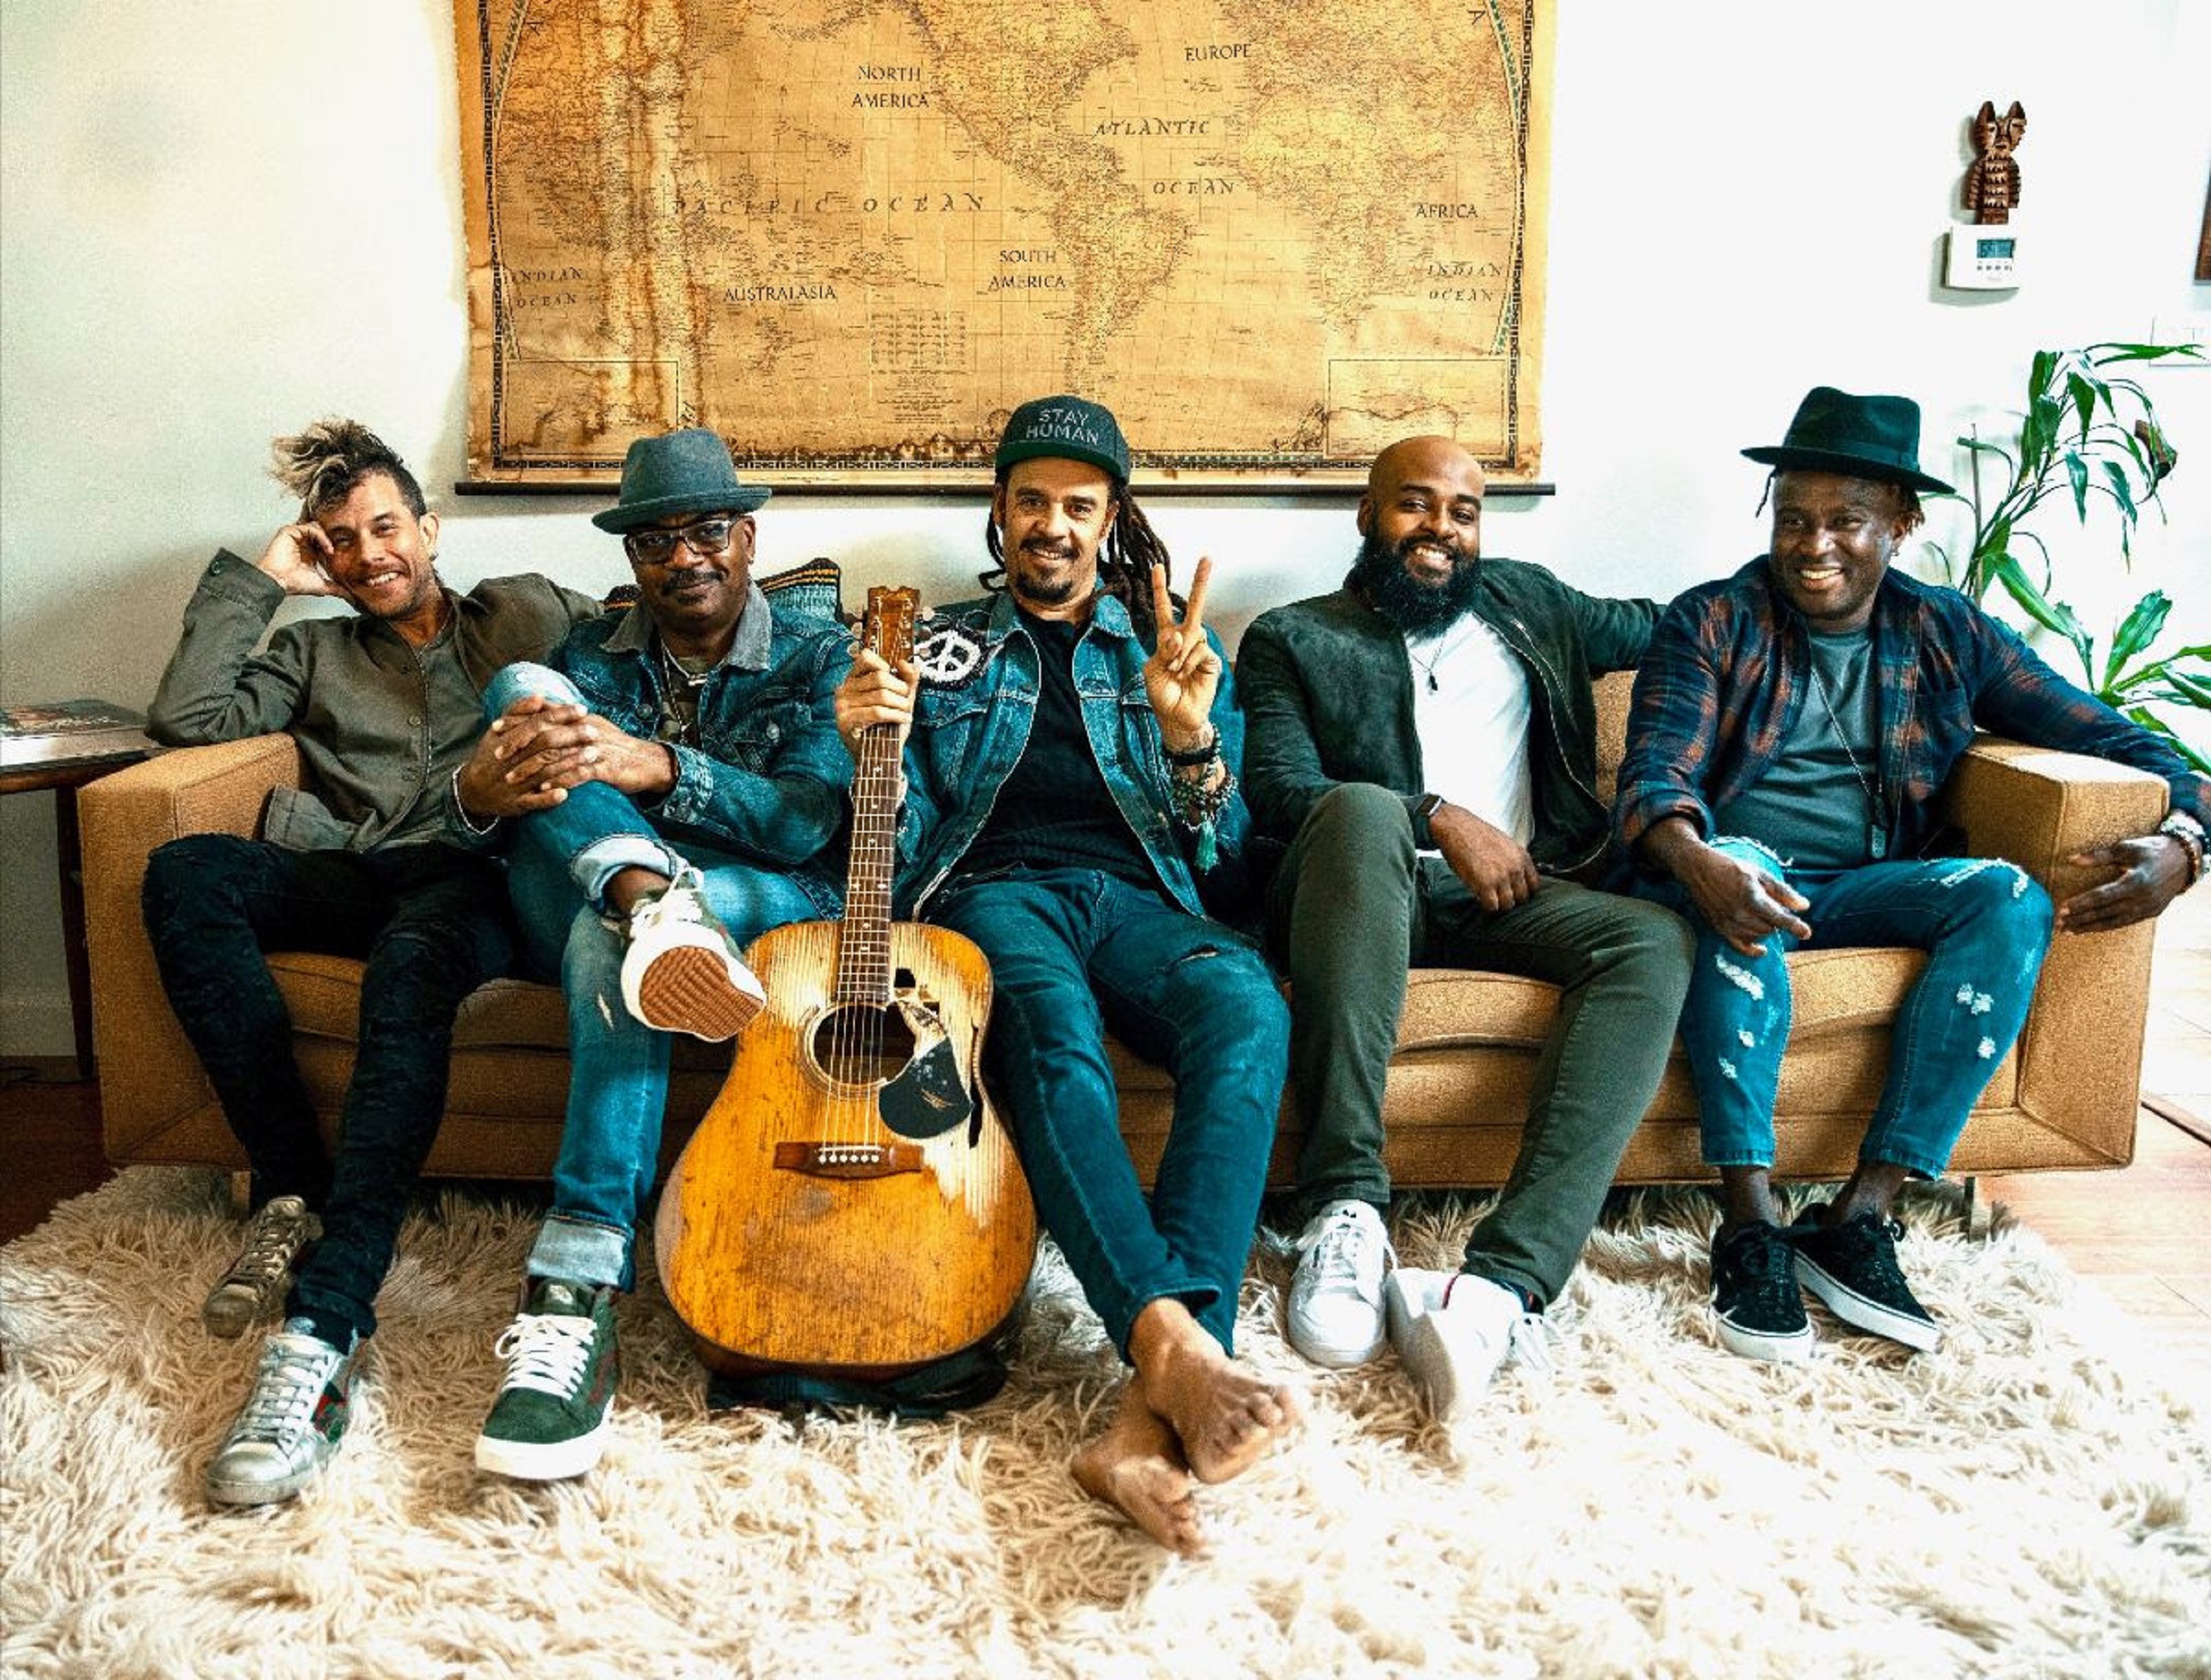 Michael Franti & Spearhead release new song 'Follow Your Heart'